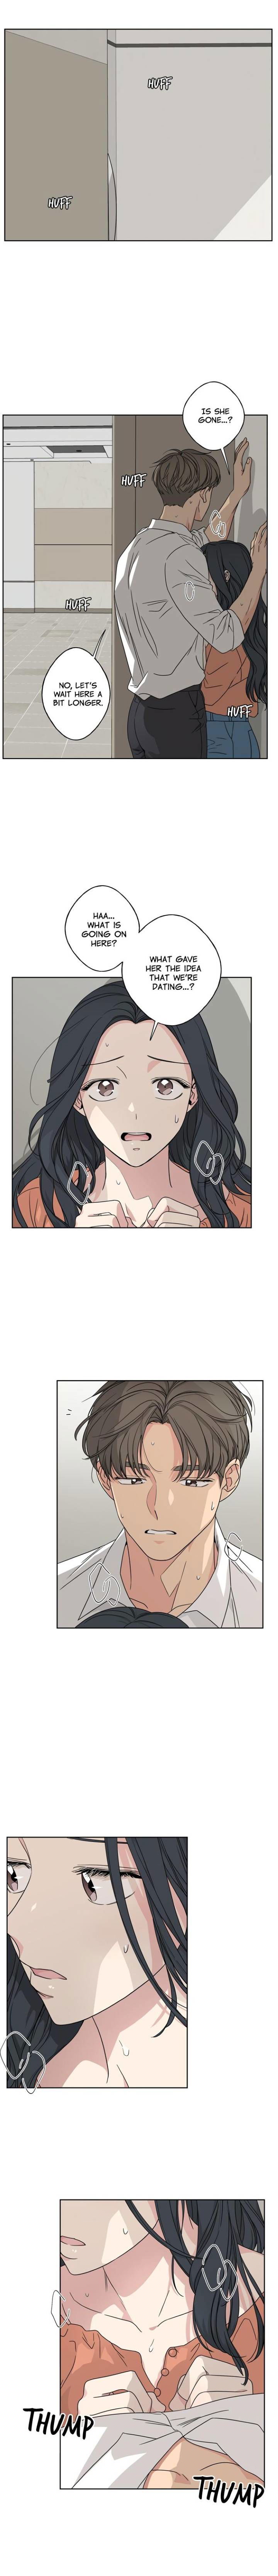 mother-im-sorry-chap-24-12